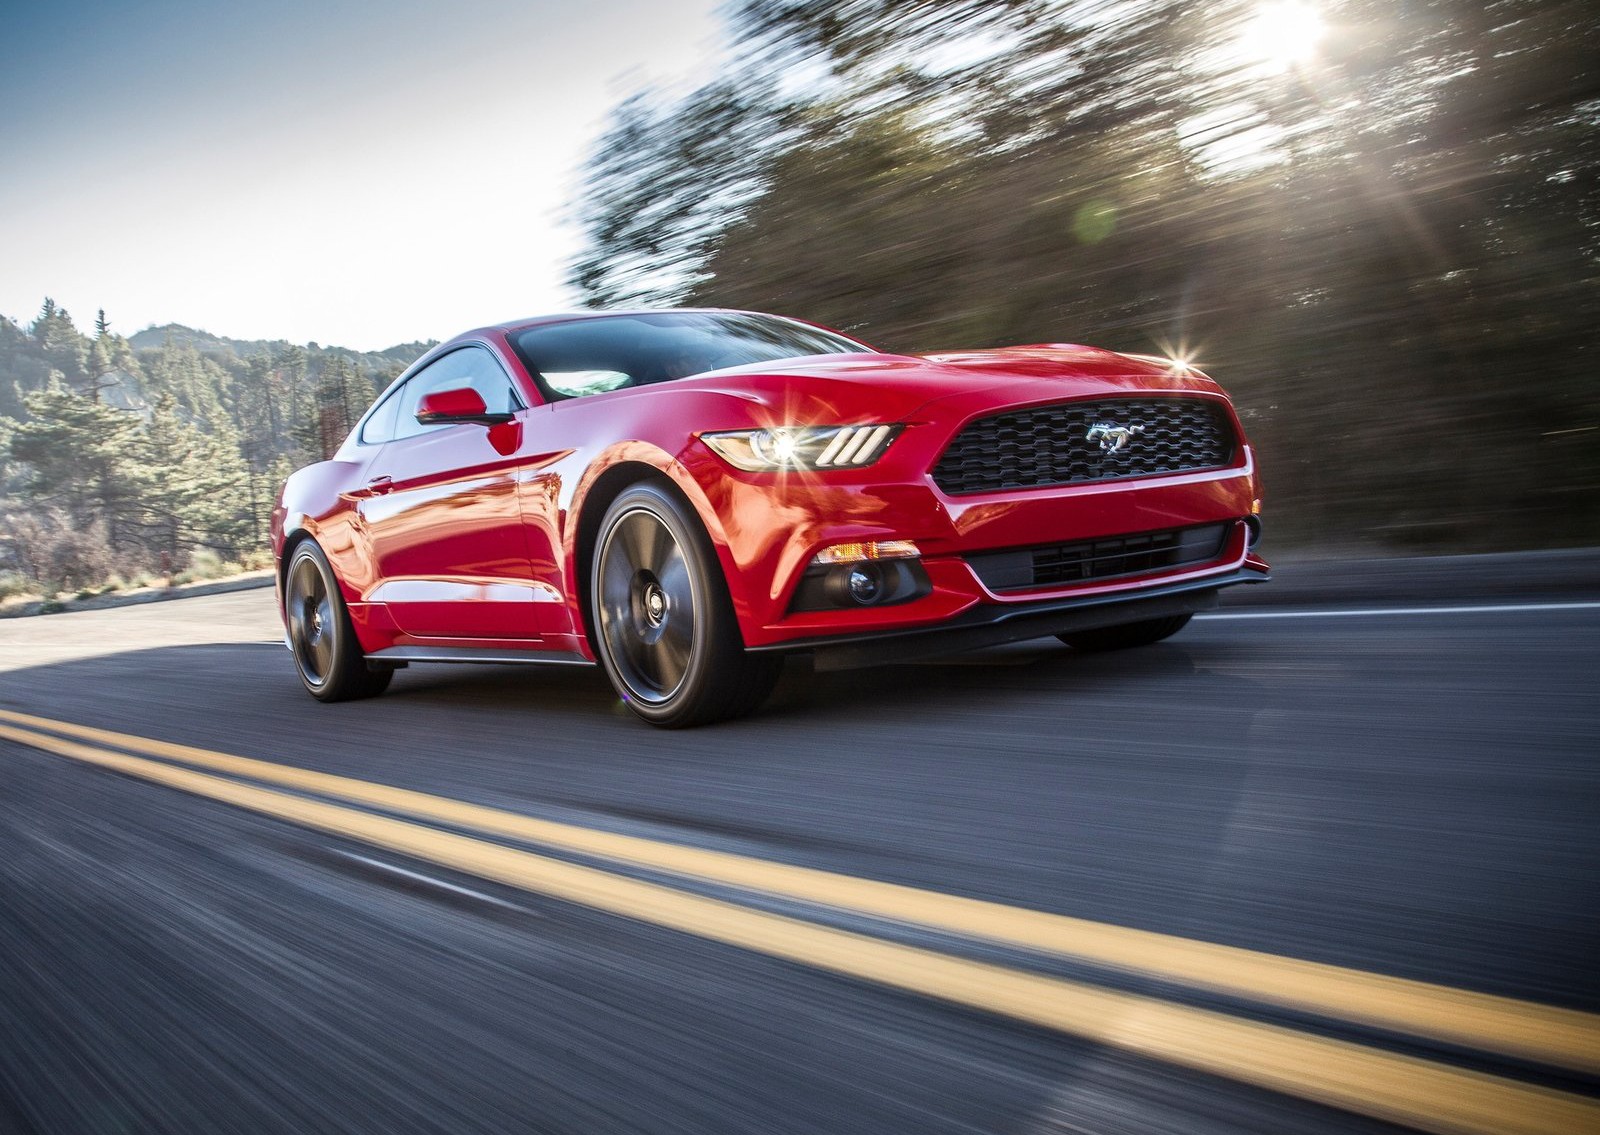 2015 Ford Mustang Eurospec Model Loses Some Power Over